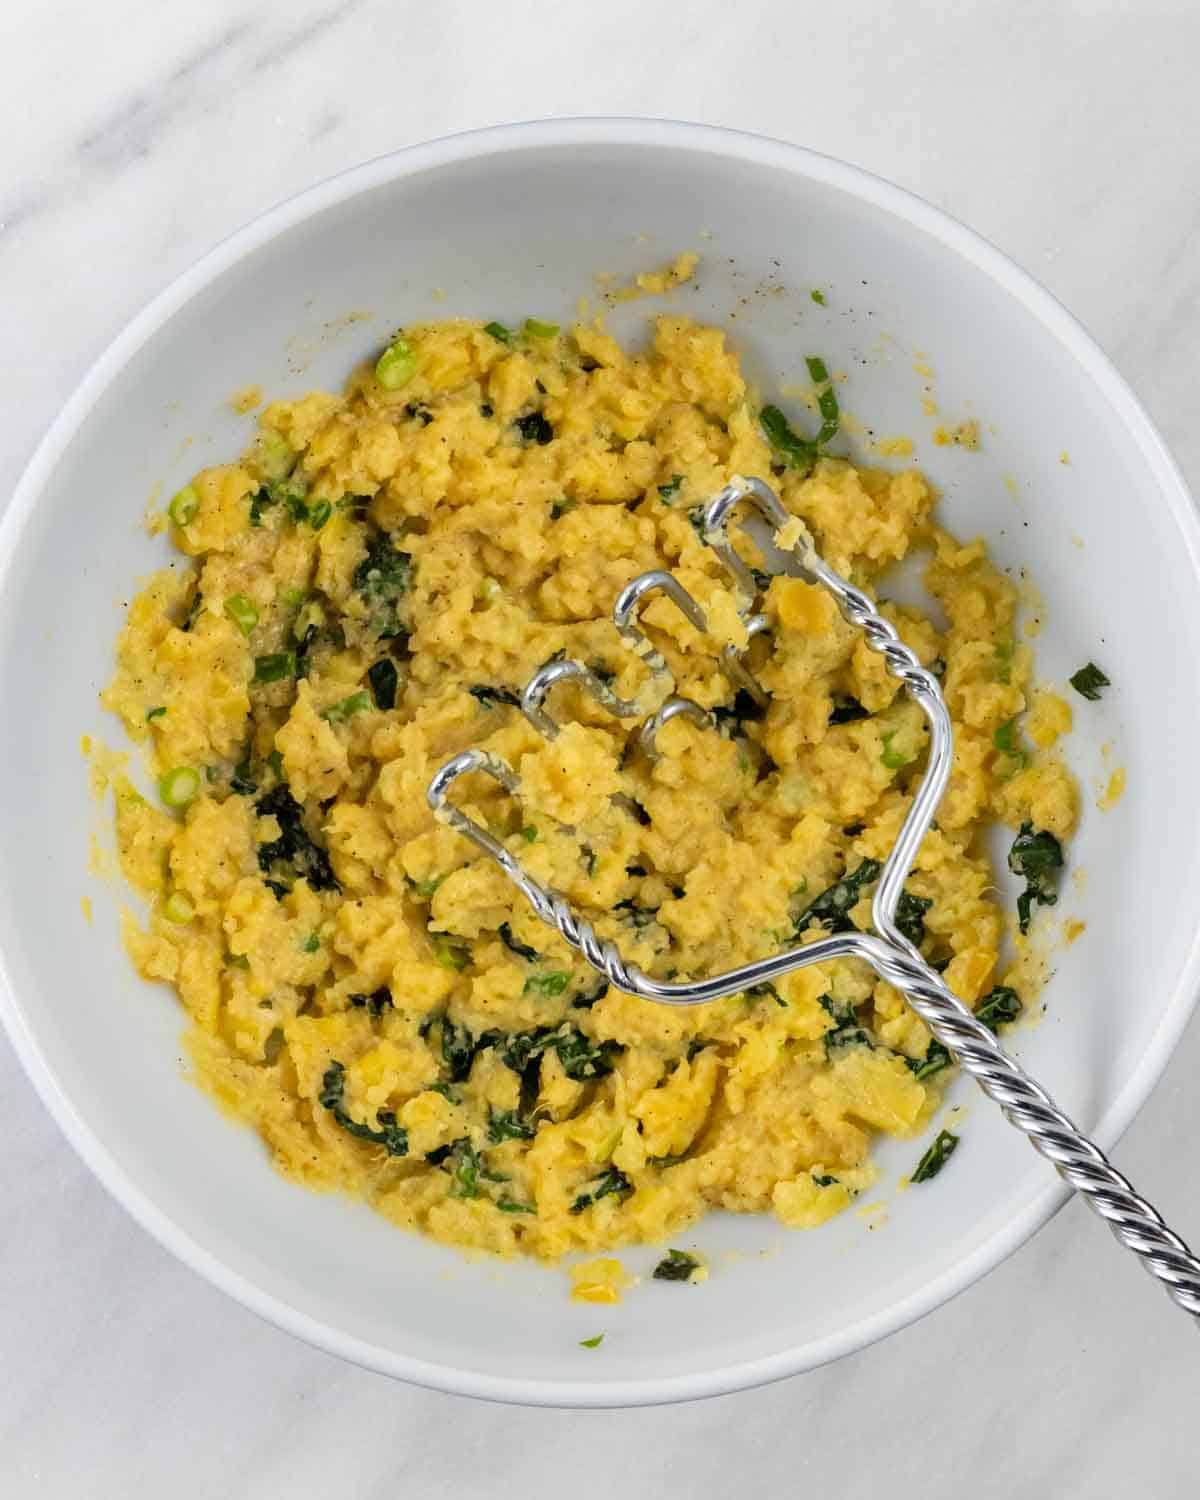 Mashed rutabagas with kale in a mixing bowl with a potato masher.